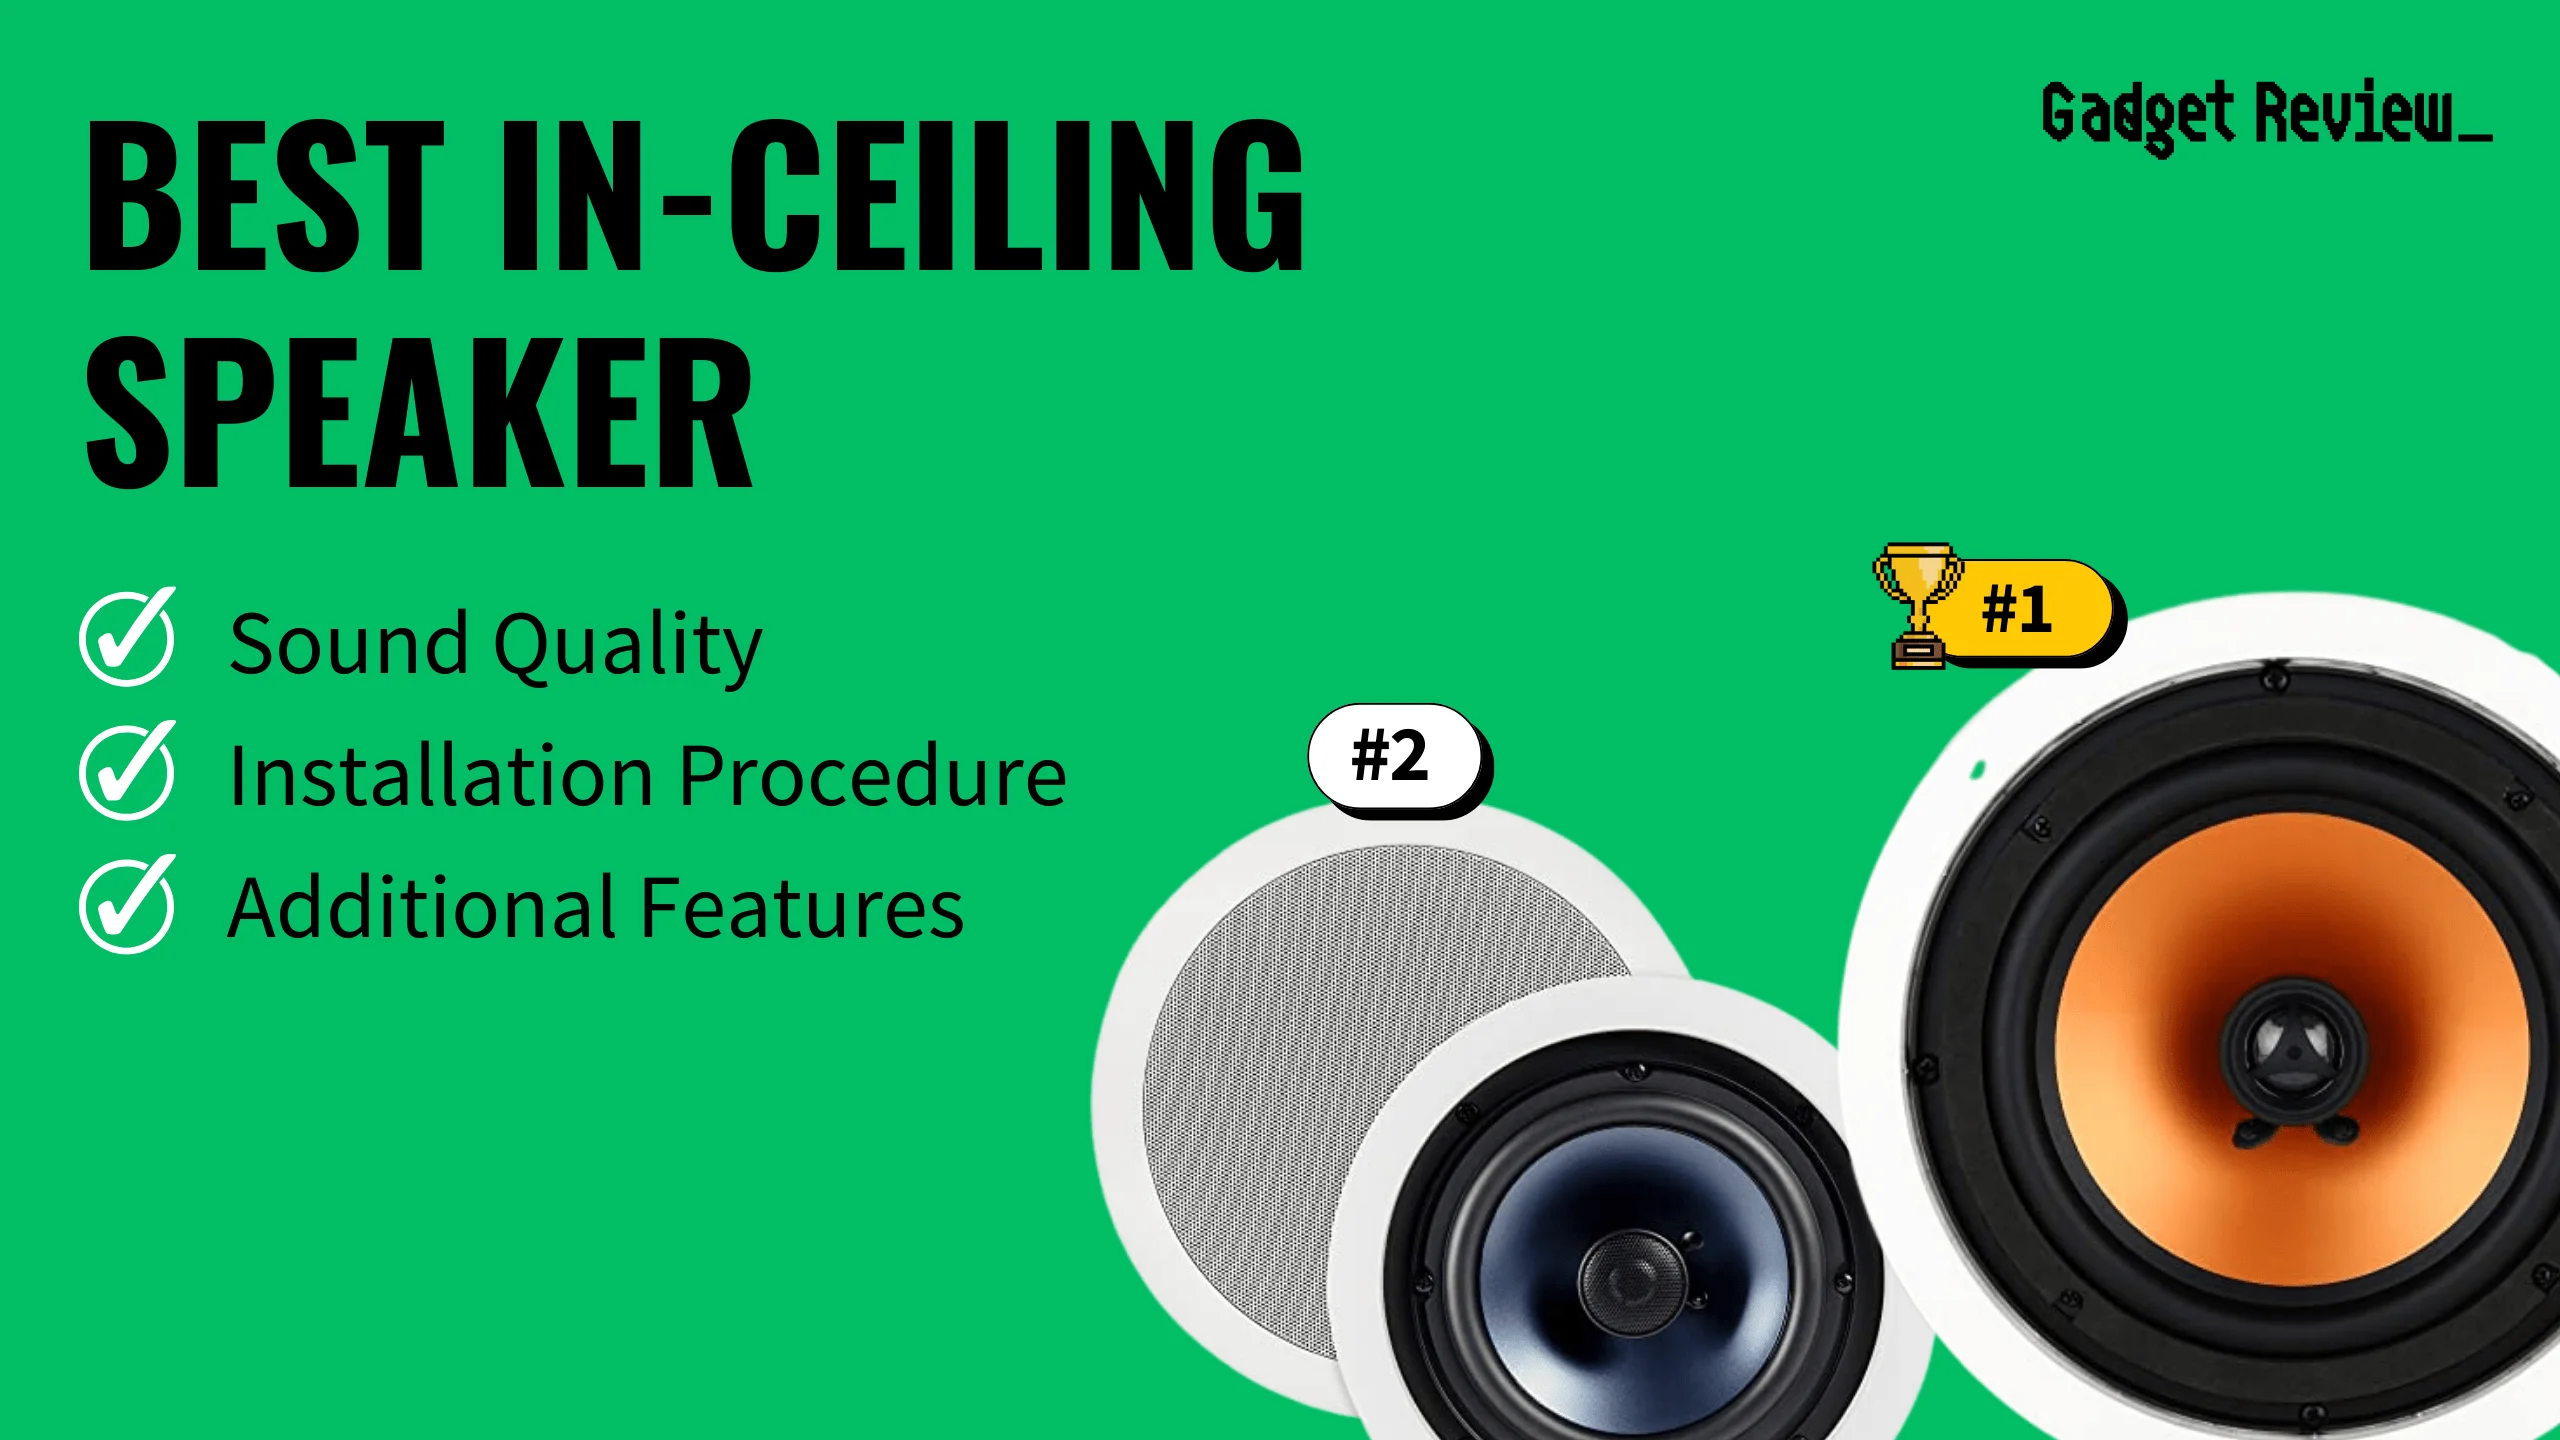 best in ceiling speaker featured image that shows the top three best speaker models